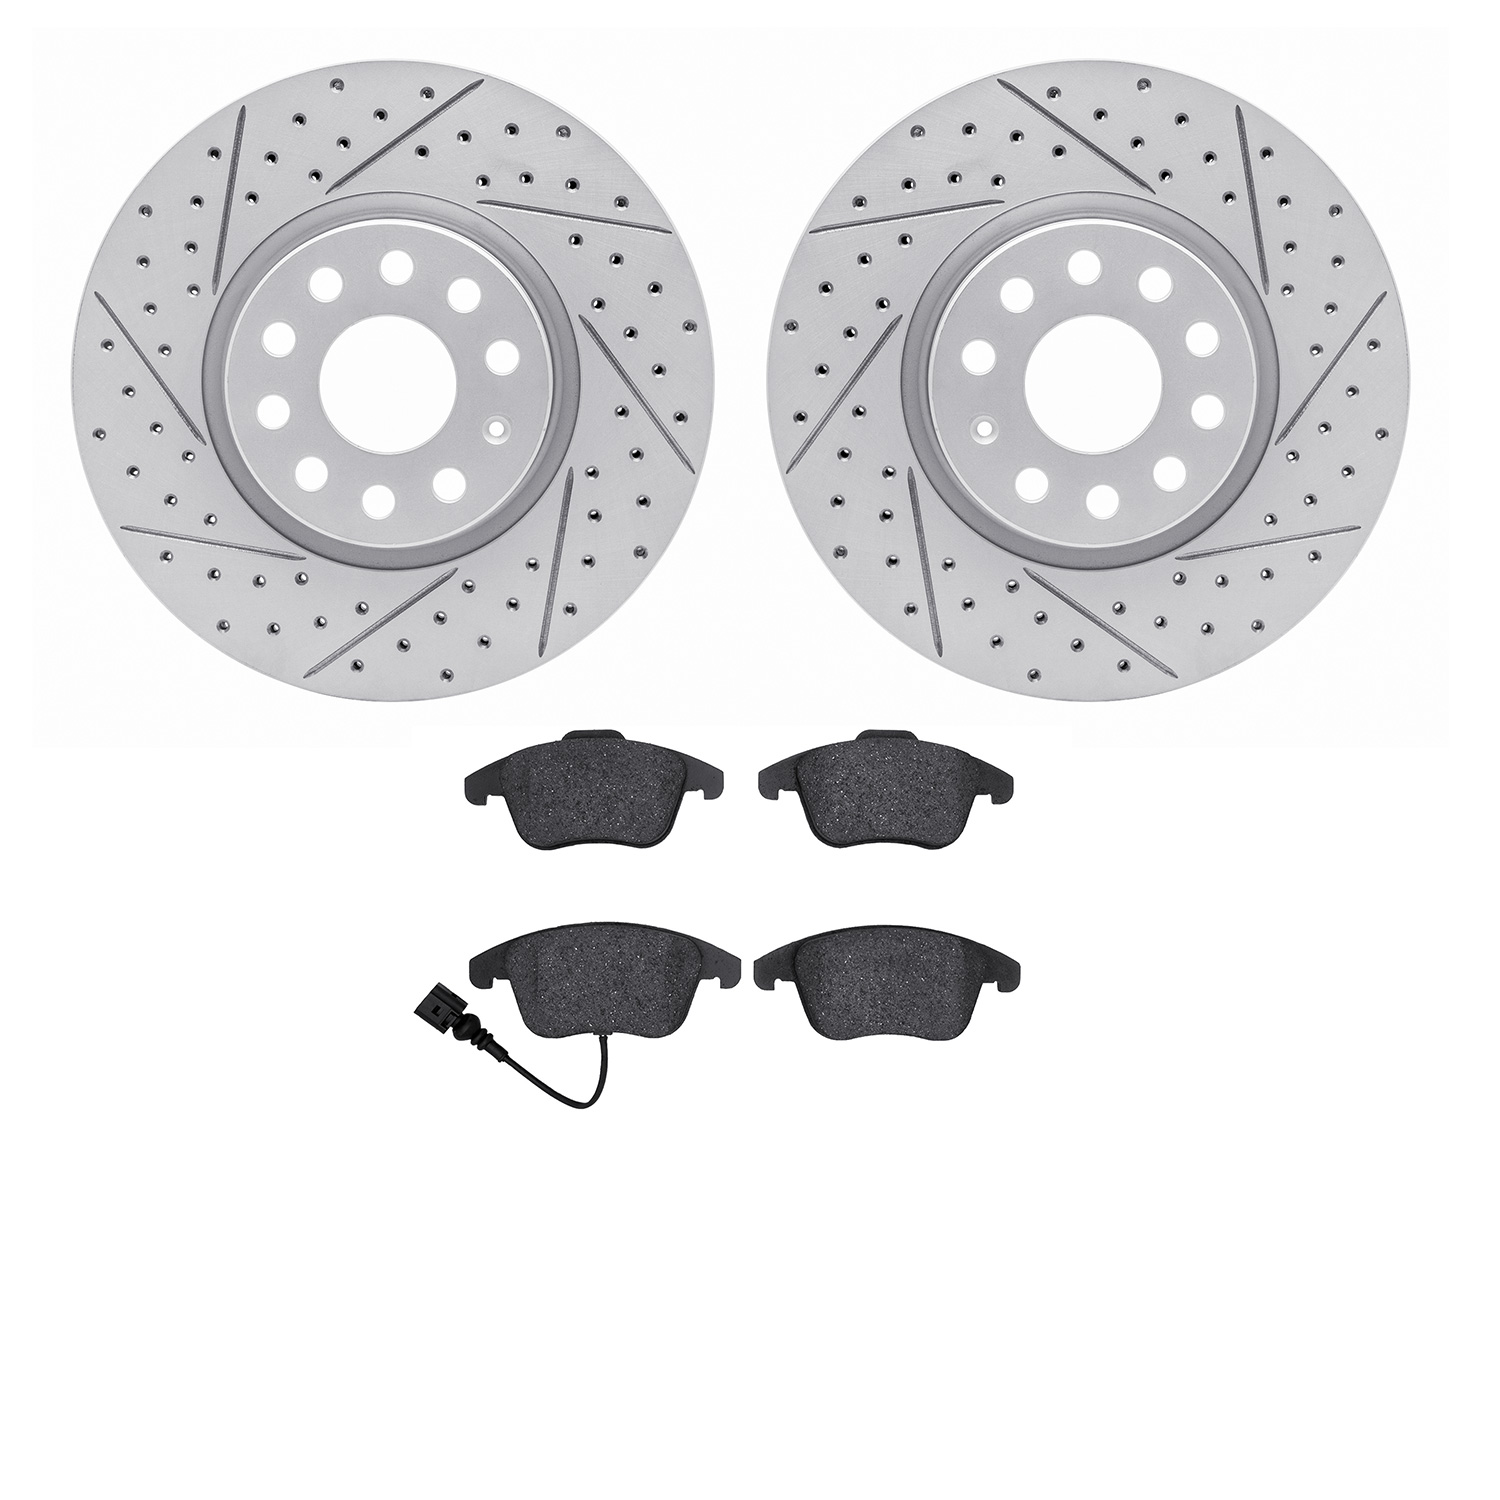 2502-74088 Geoperformance Drilled/Slotted Rotors w/5000 Advanced Brake Pads Kit, 2009-2013 Audi/Volkswagen, Position: Front